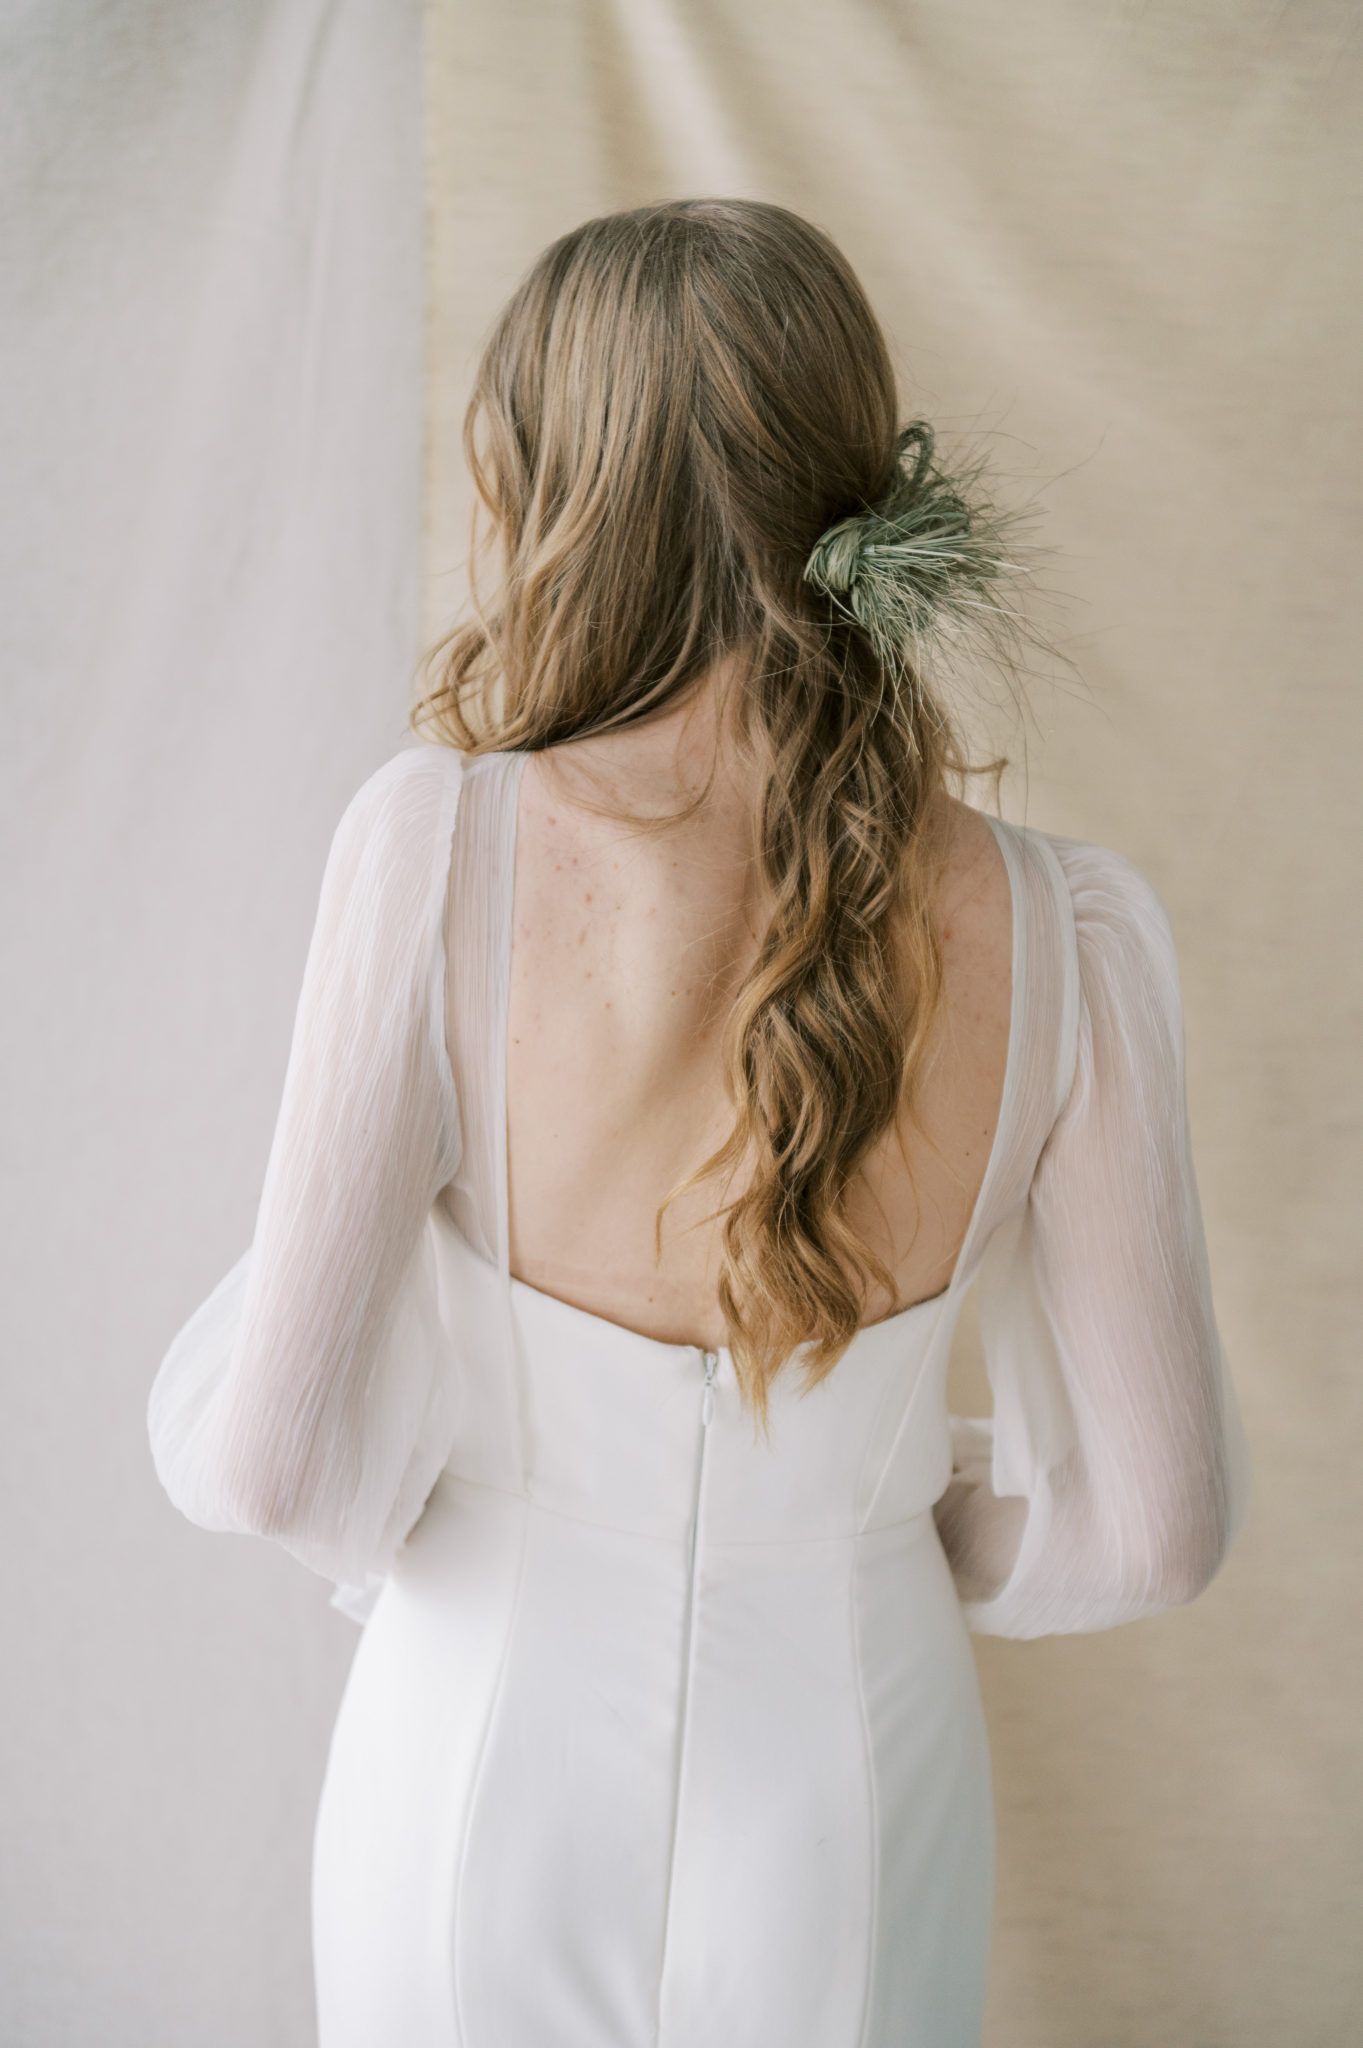 This studio session features dried grasses and bohemian bridal inspiration